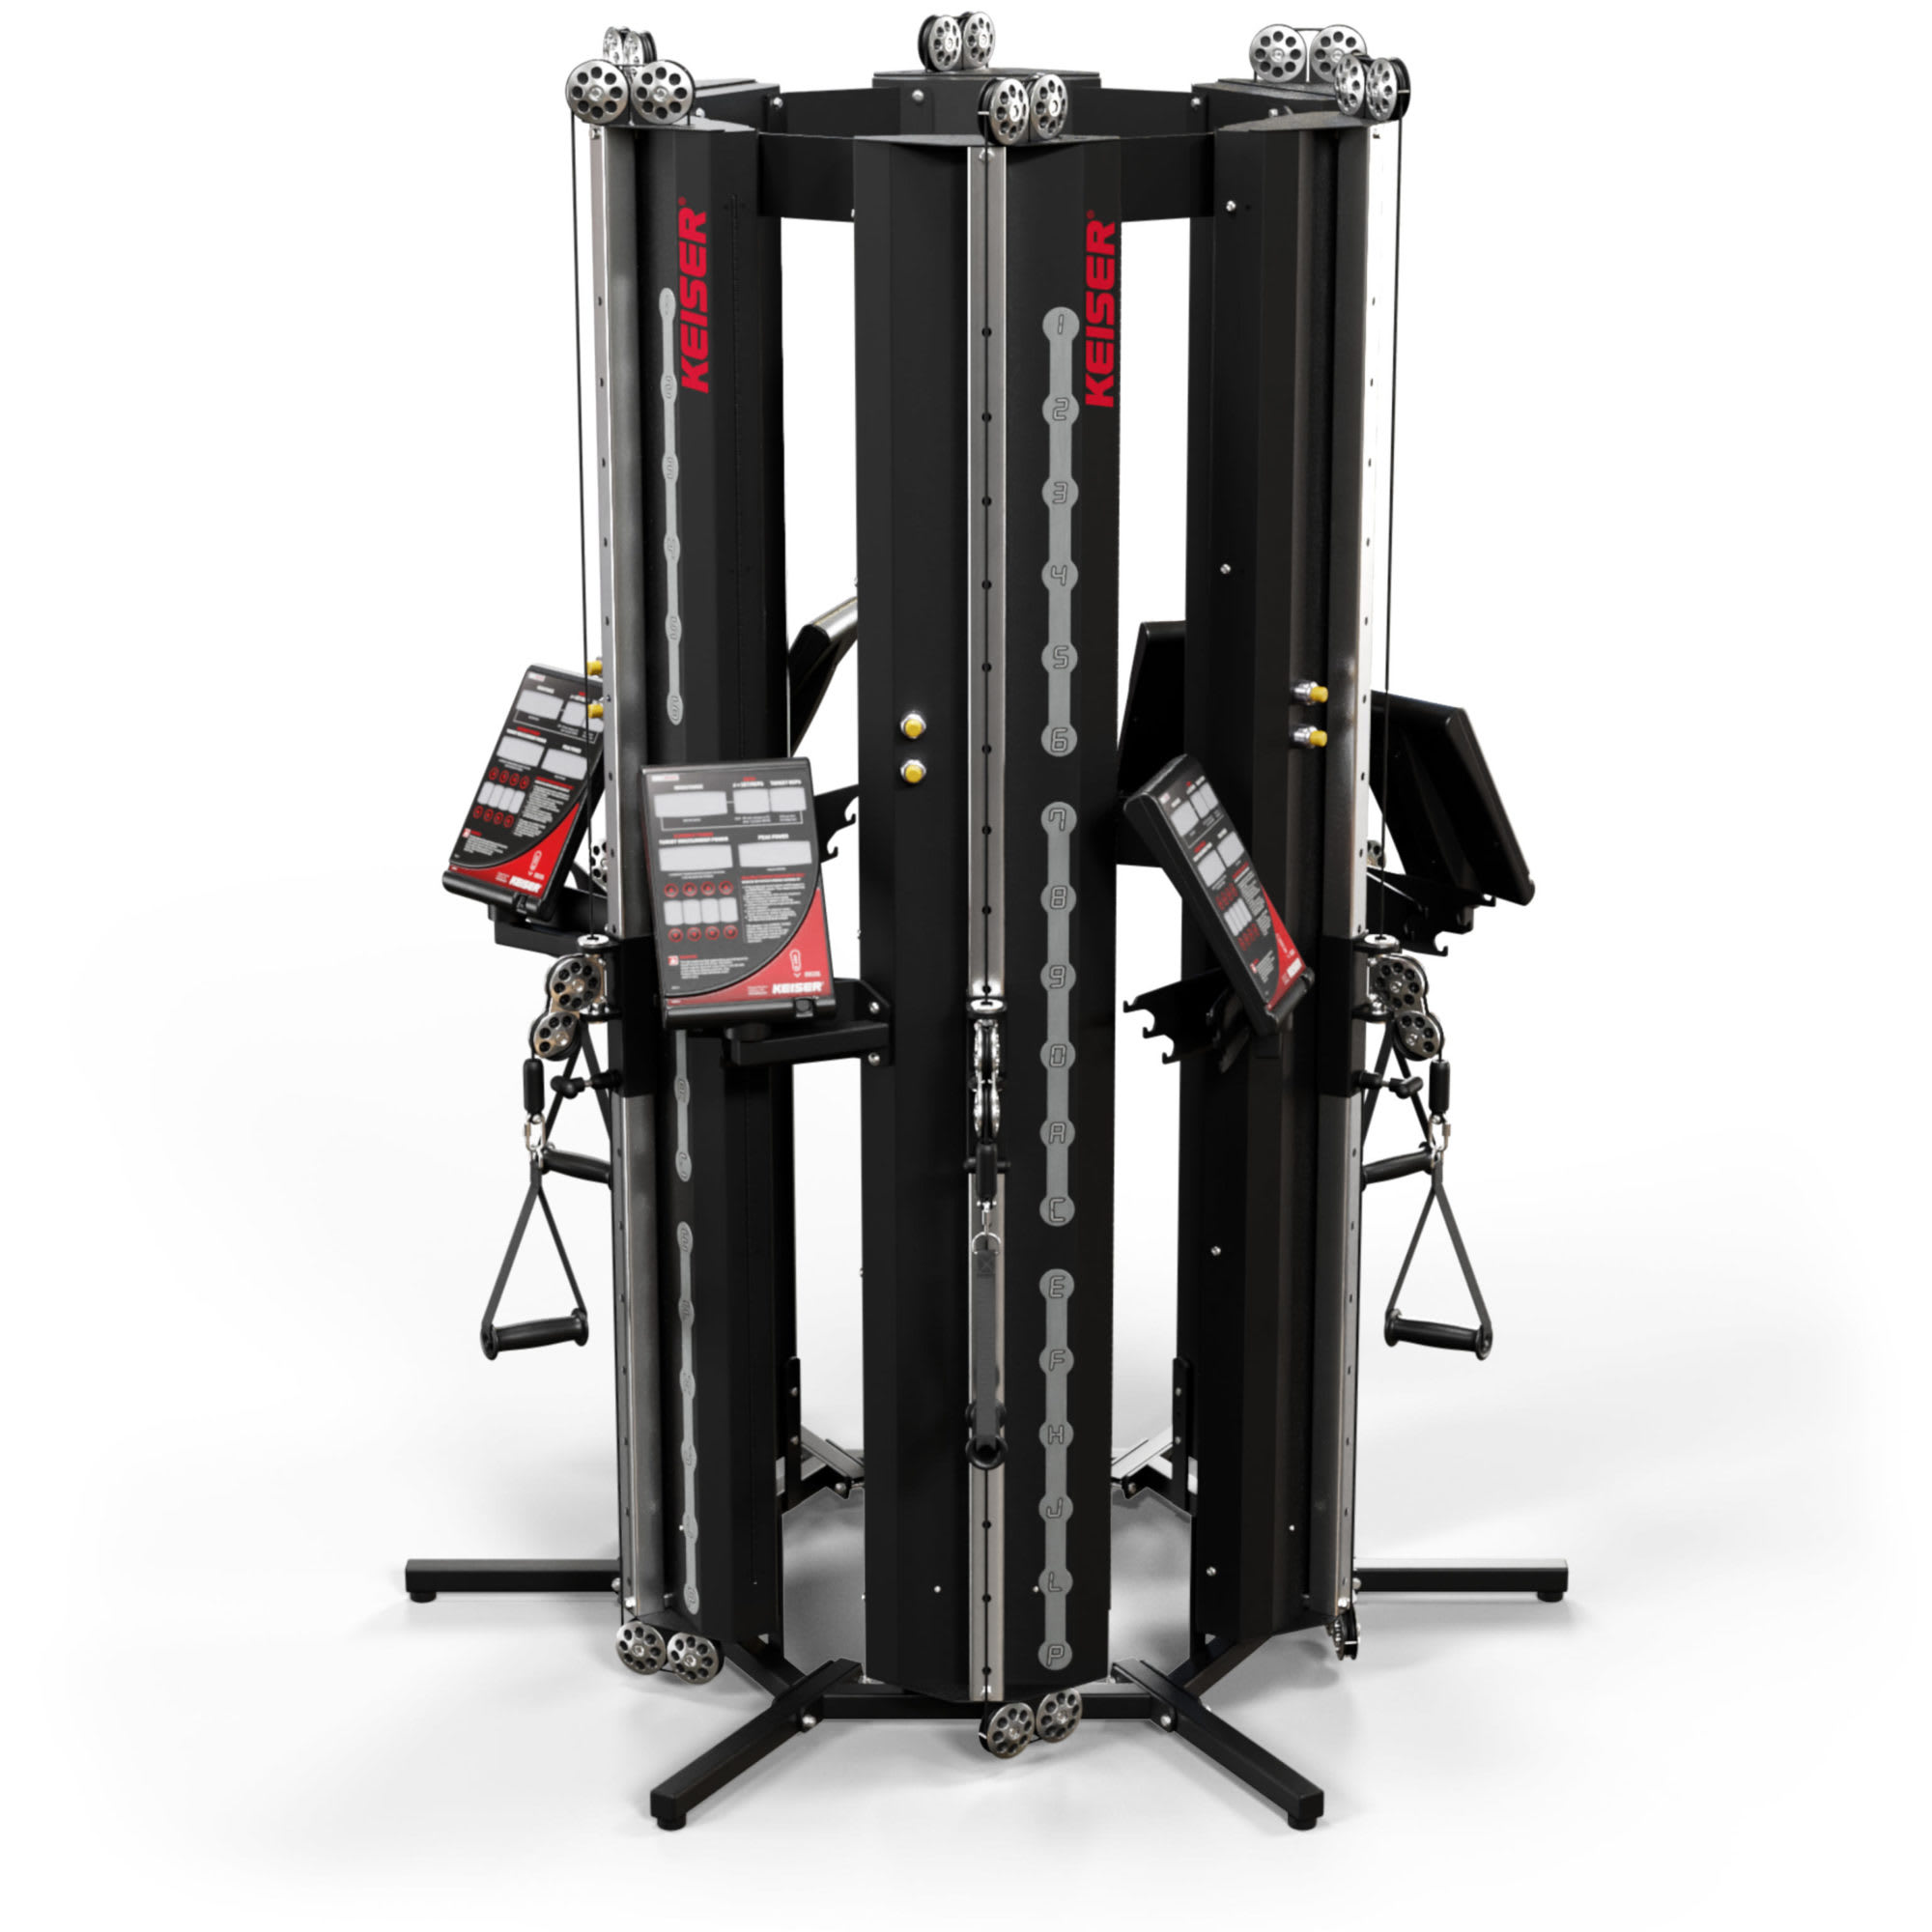 Keiser Six-Pack Frame (6 Performance Trainers)